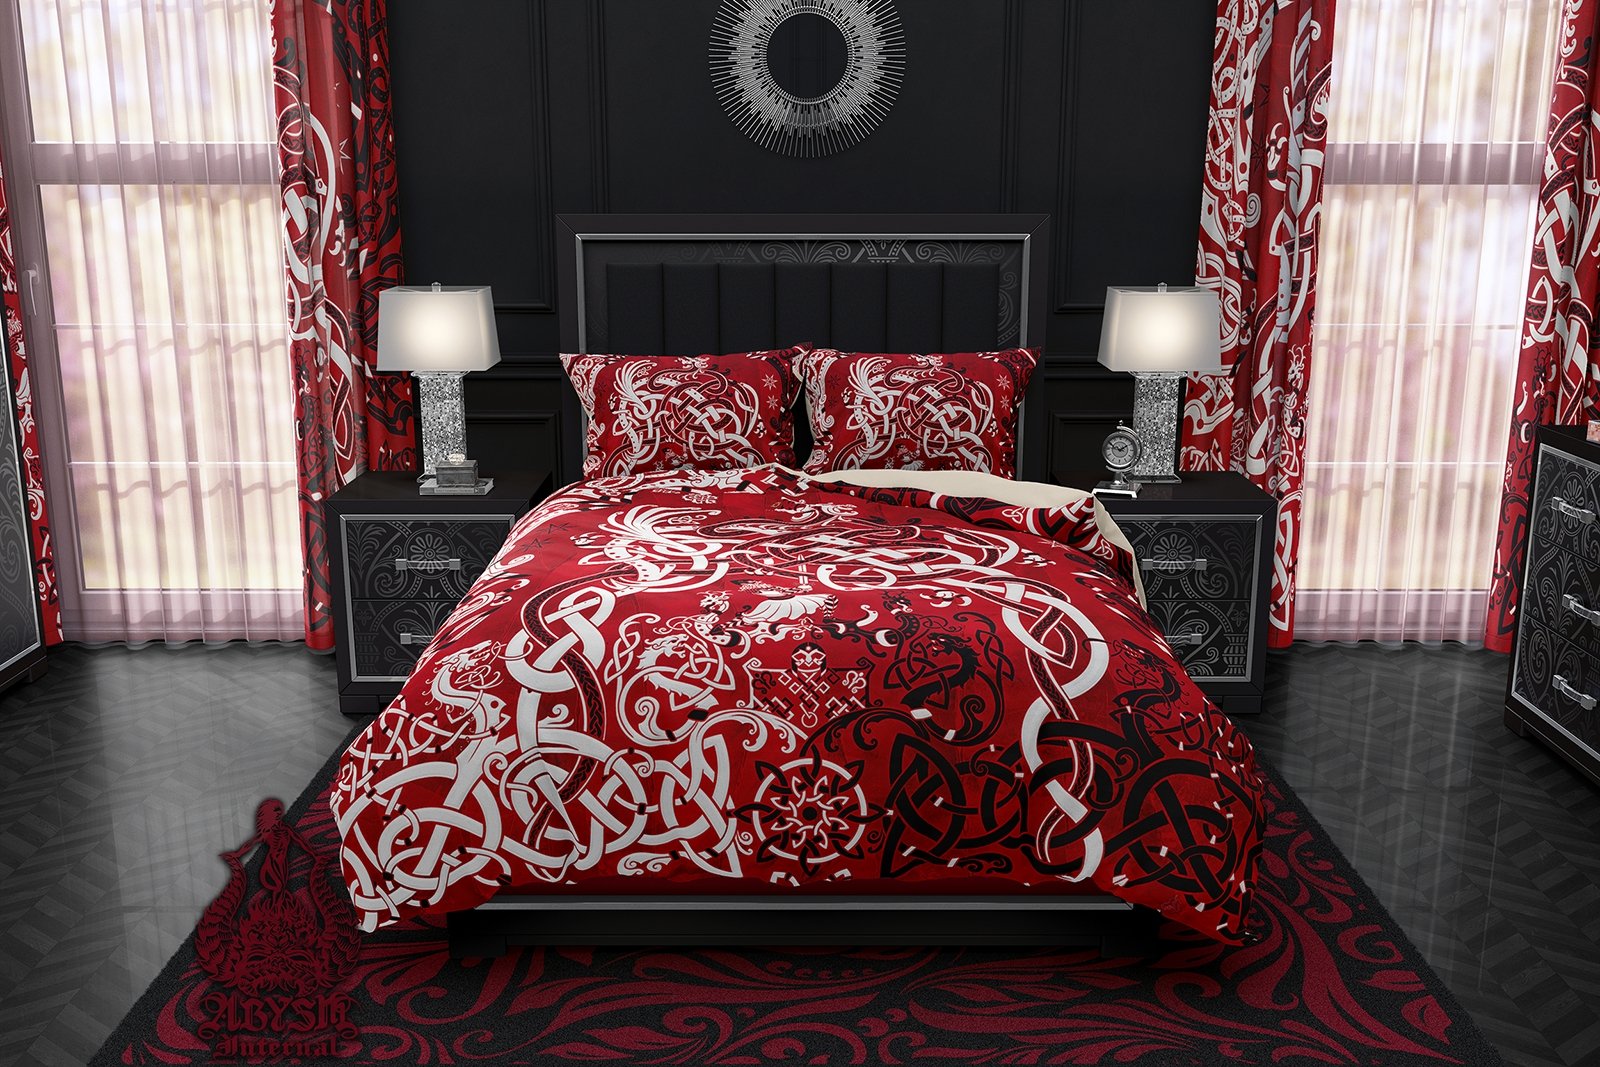 Viking Bedding Set, Comforter and Duvet, Norse Bed Cover and Bedroom Decor, Nordic Art, Sigurd kills Dragon Fafnir, King, Queen and Twin Size - Bloody Red - Abysm Internal